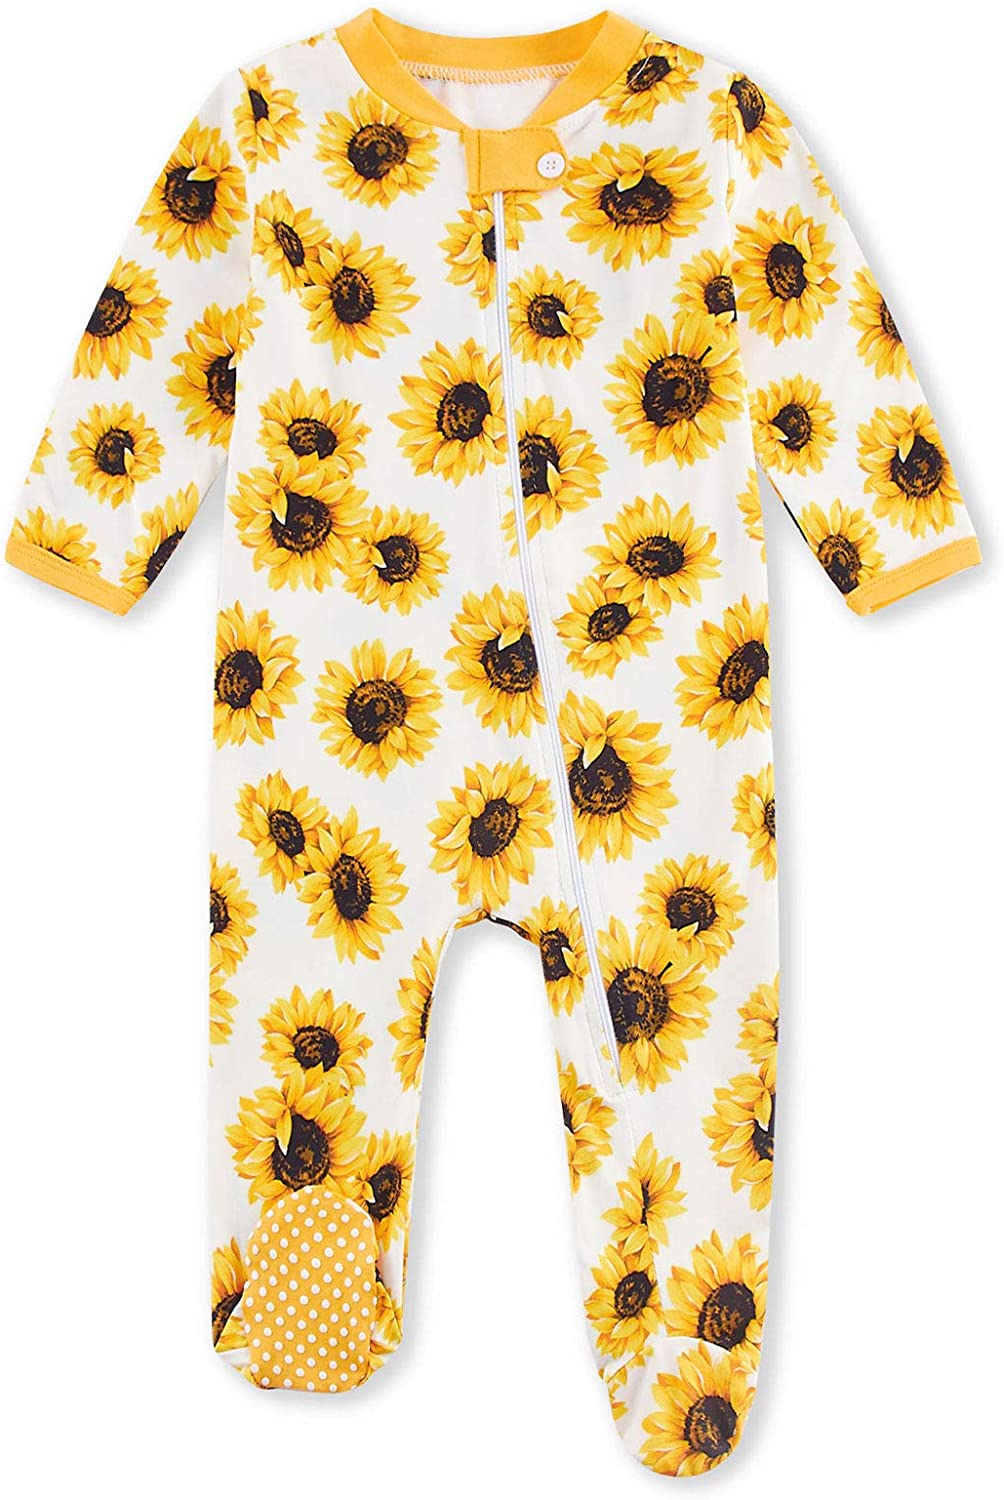 Baby Kids Sleep and Play Baby Cotton Sleeper Zip Front Footed Pajamas 0-12 Month